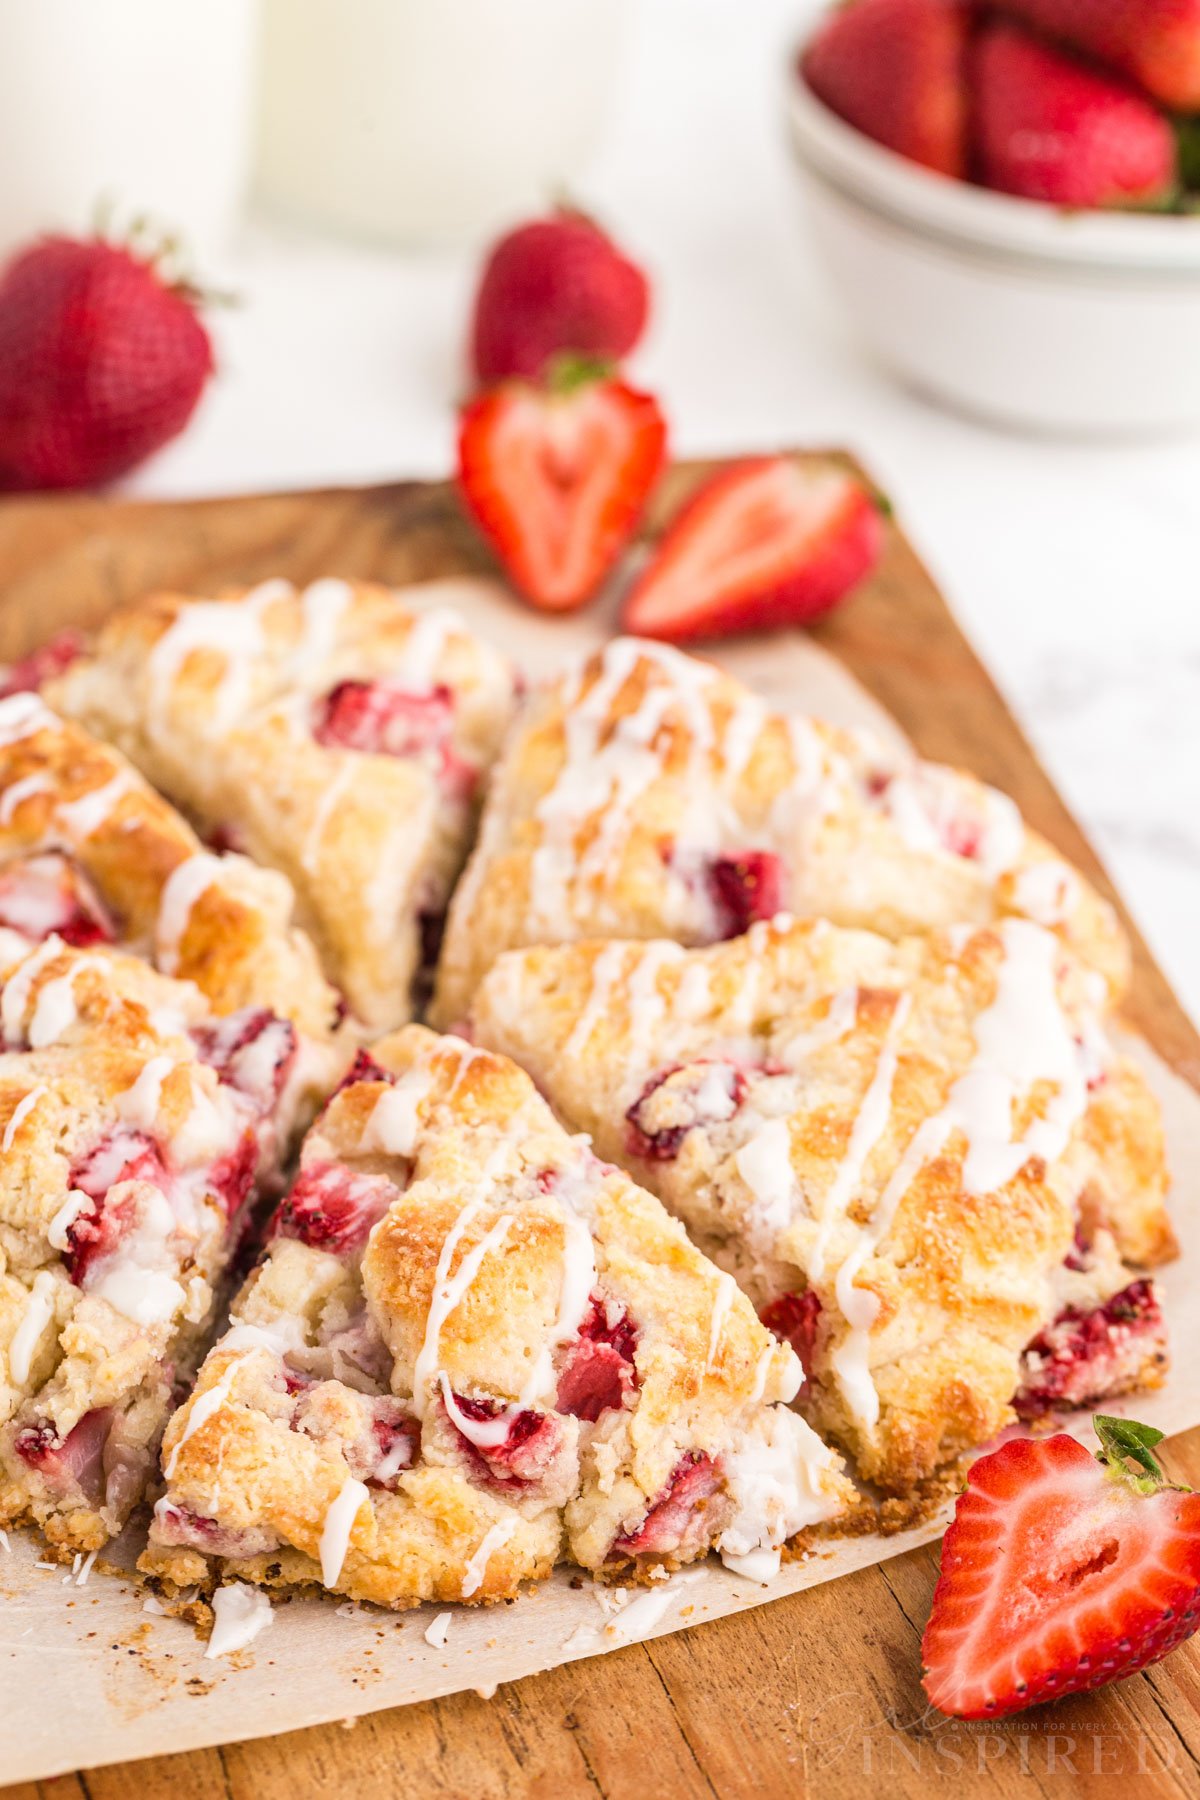 Strawberry scones cut into wedges on cutting board with fresh strawberry halves.